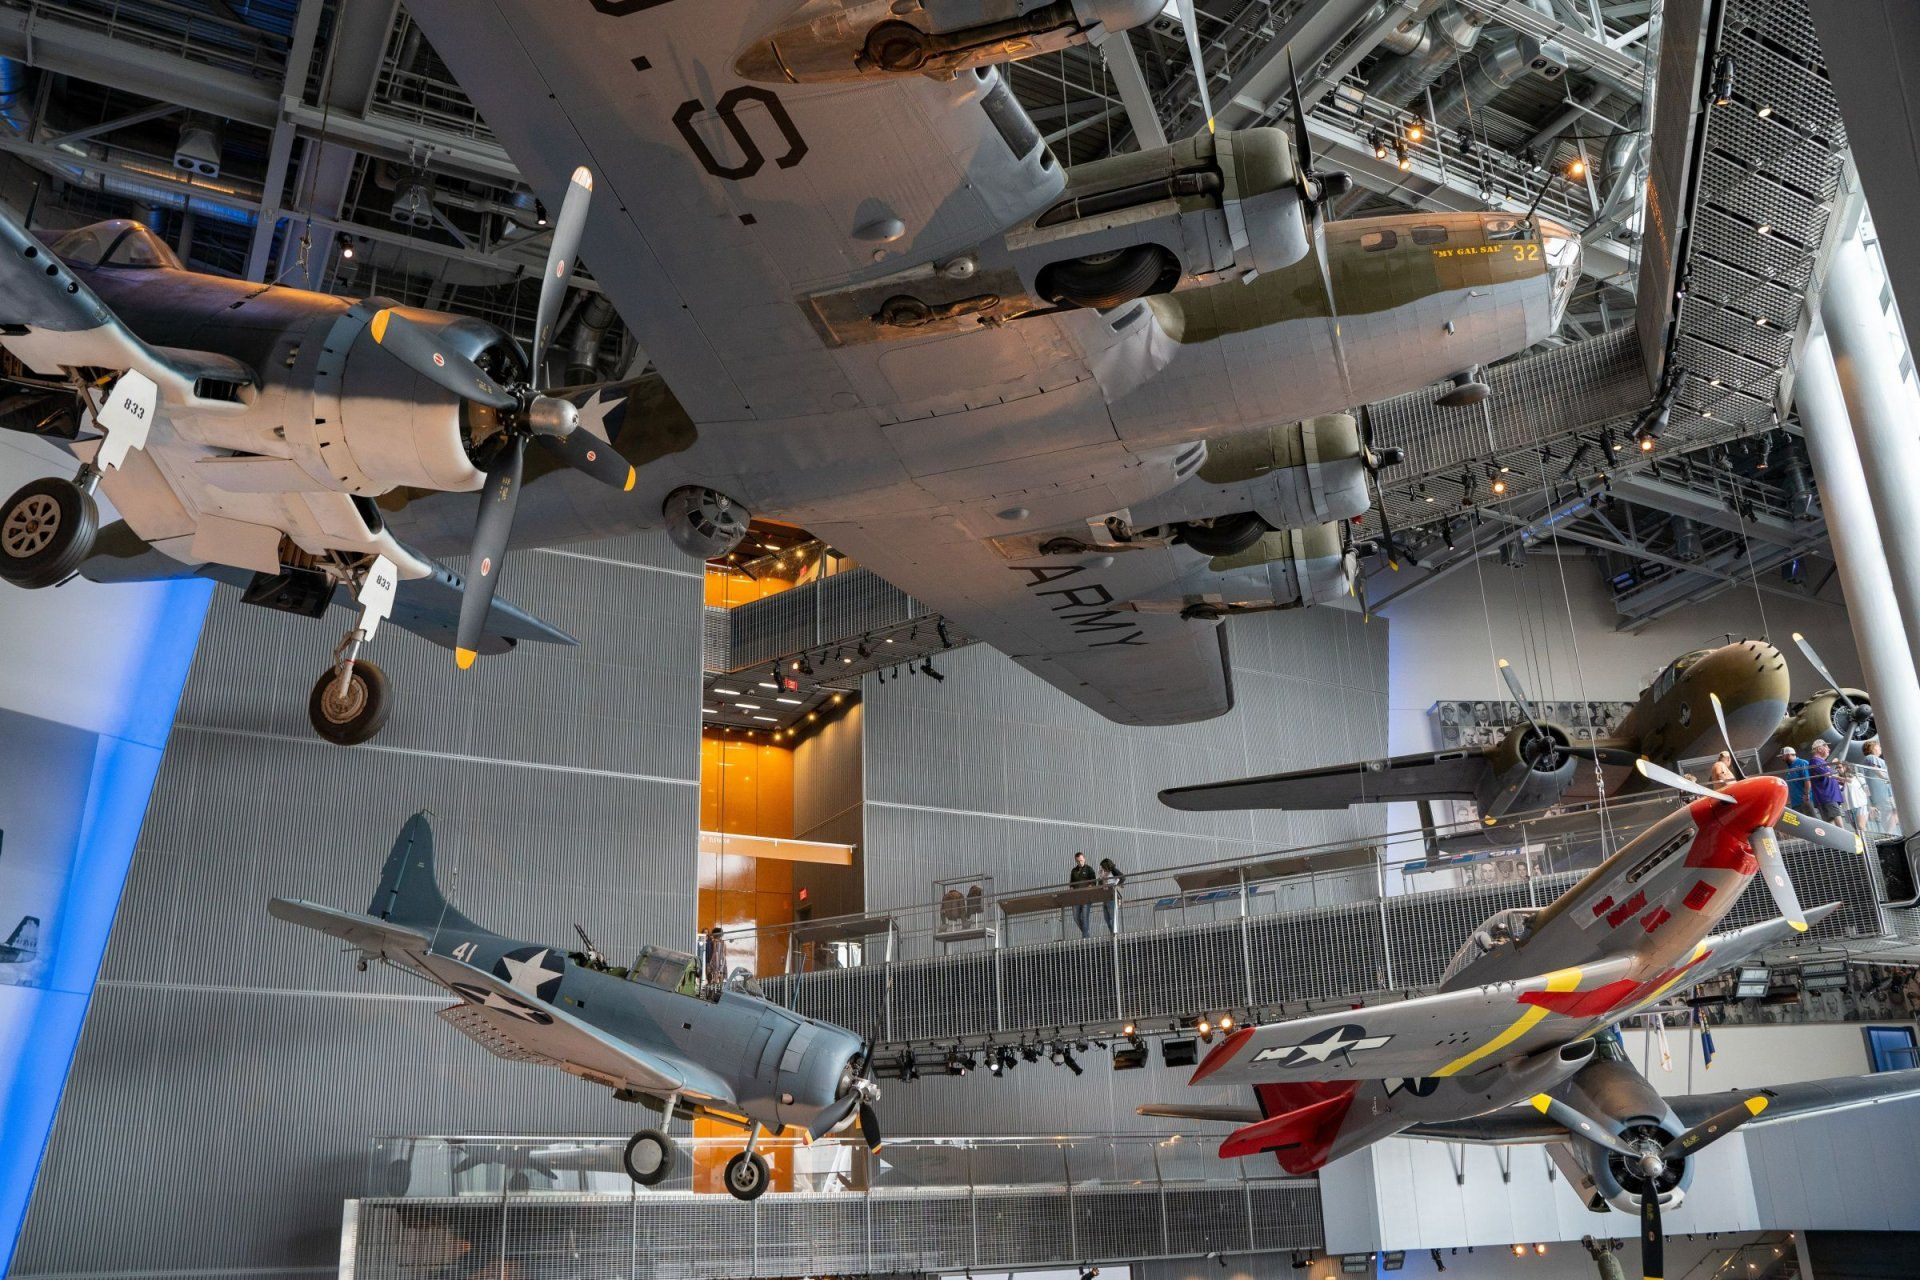 an army plane hangs from the ceiling of a museum